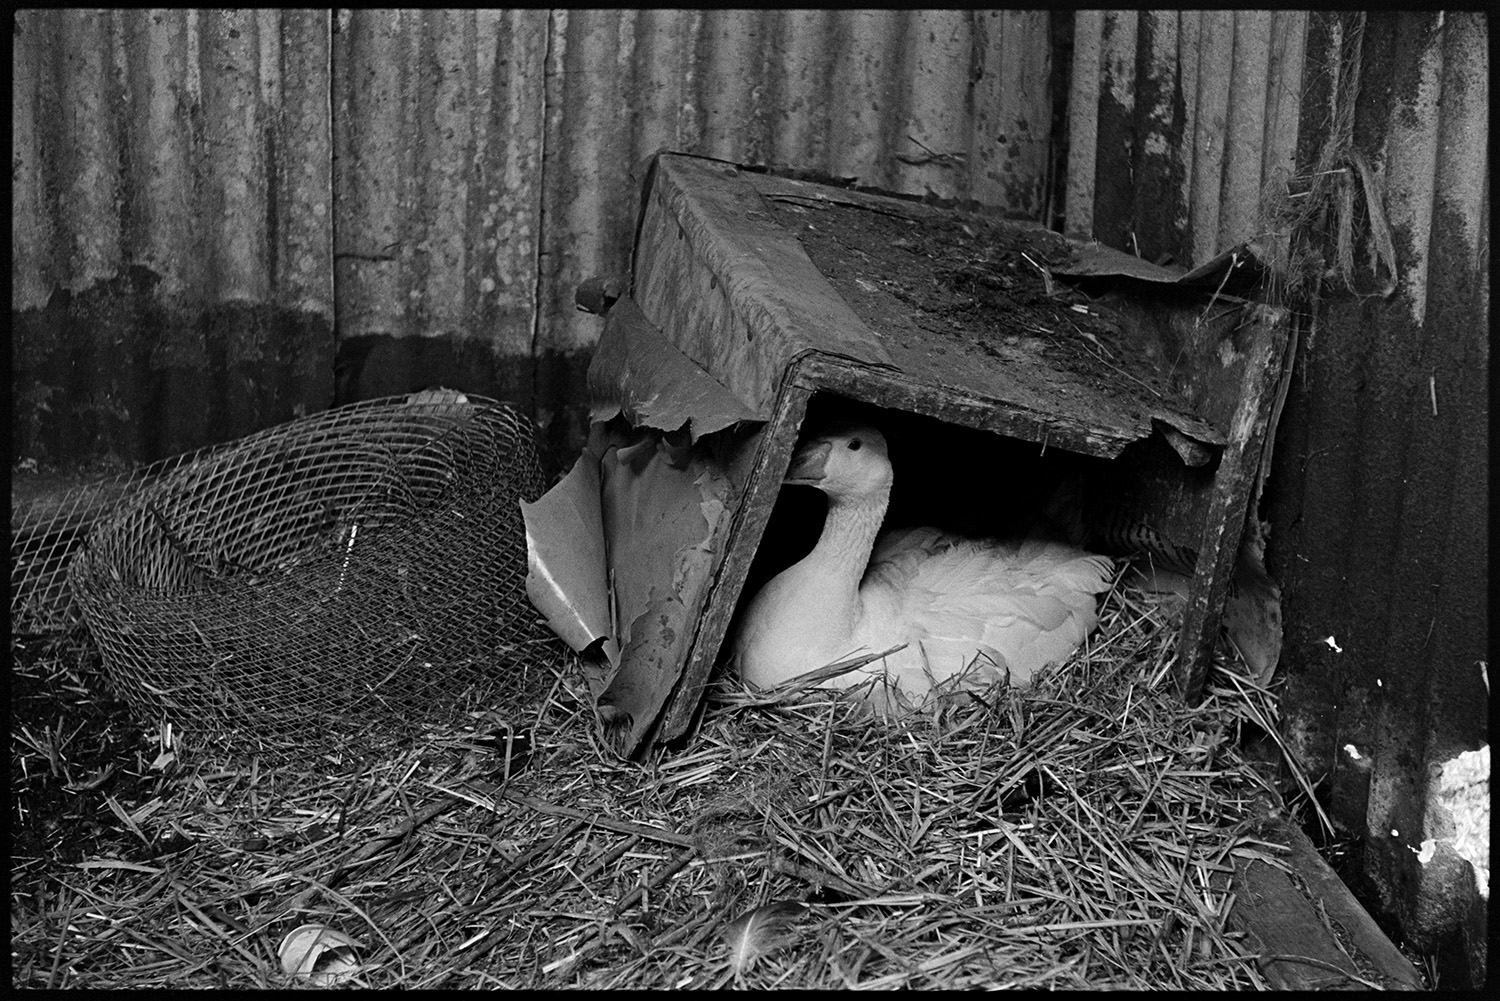 Ducks. Goose sitting on nest in old packing case. 
[A goose sat on a nest in a old packing container in a corrugated iron shed at Millhams, Dolton. Straw is on the floor of the shed and a roll of wire is next to the nest.]